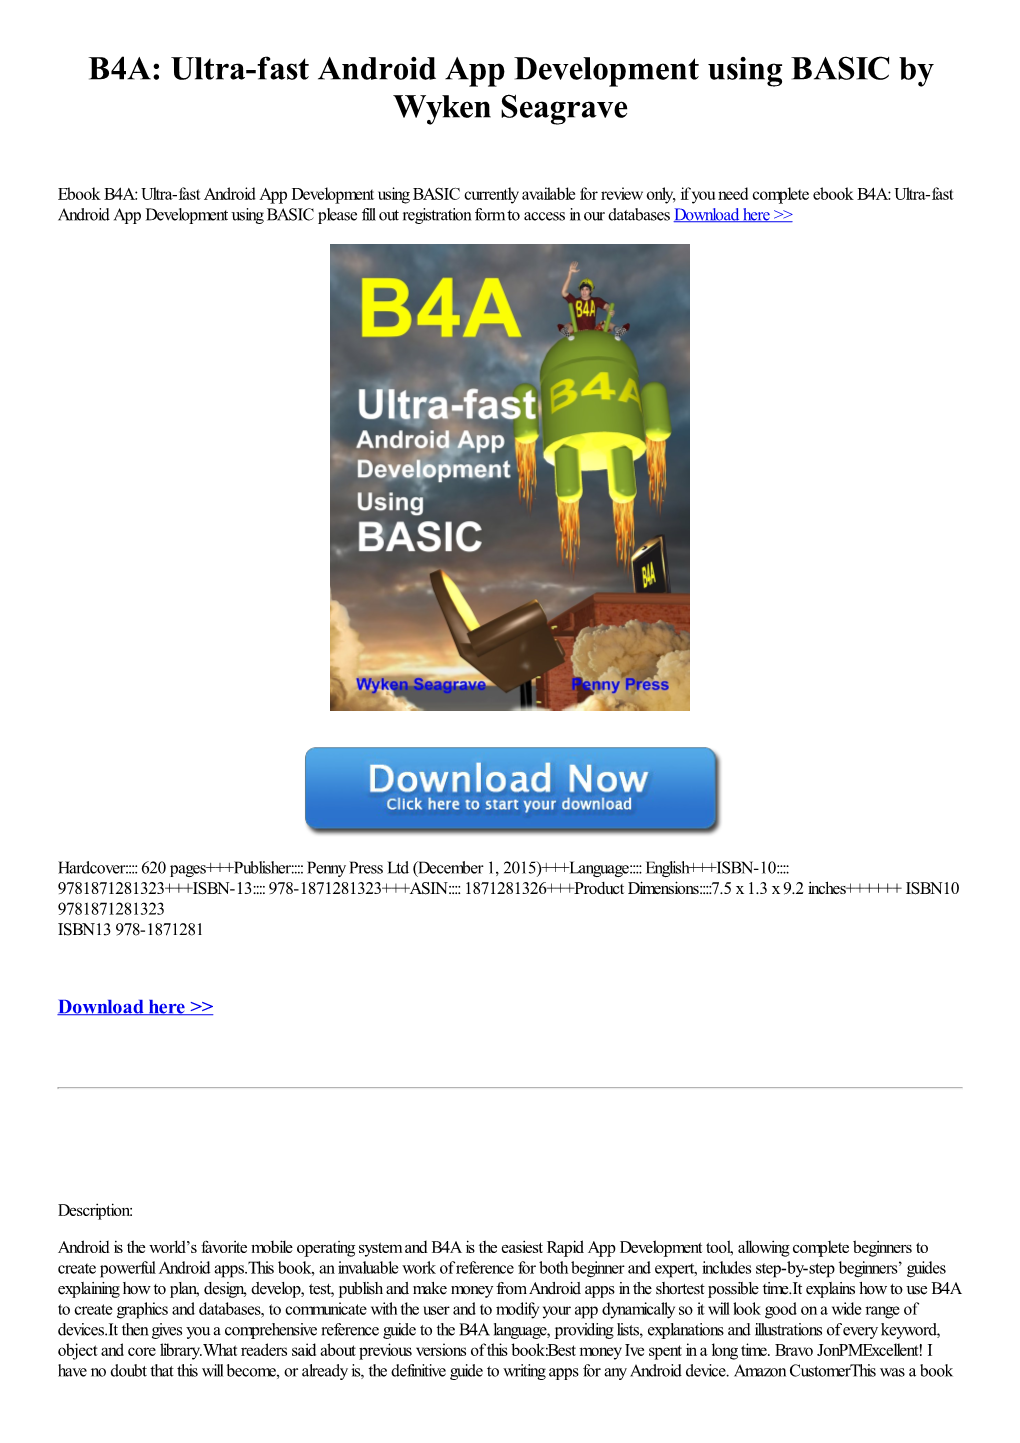 B4A: Ultra-Fast Android App Development Using BASIC by Wyken Seagrave